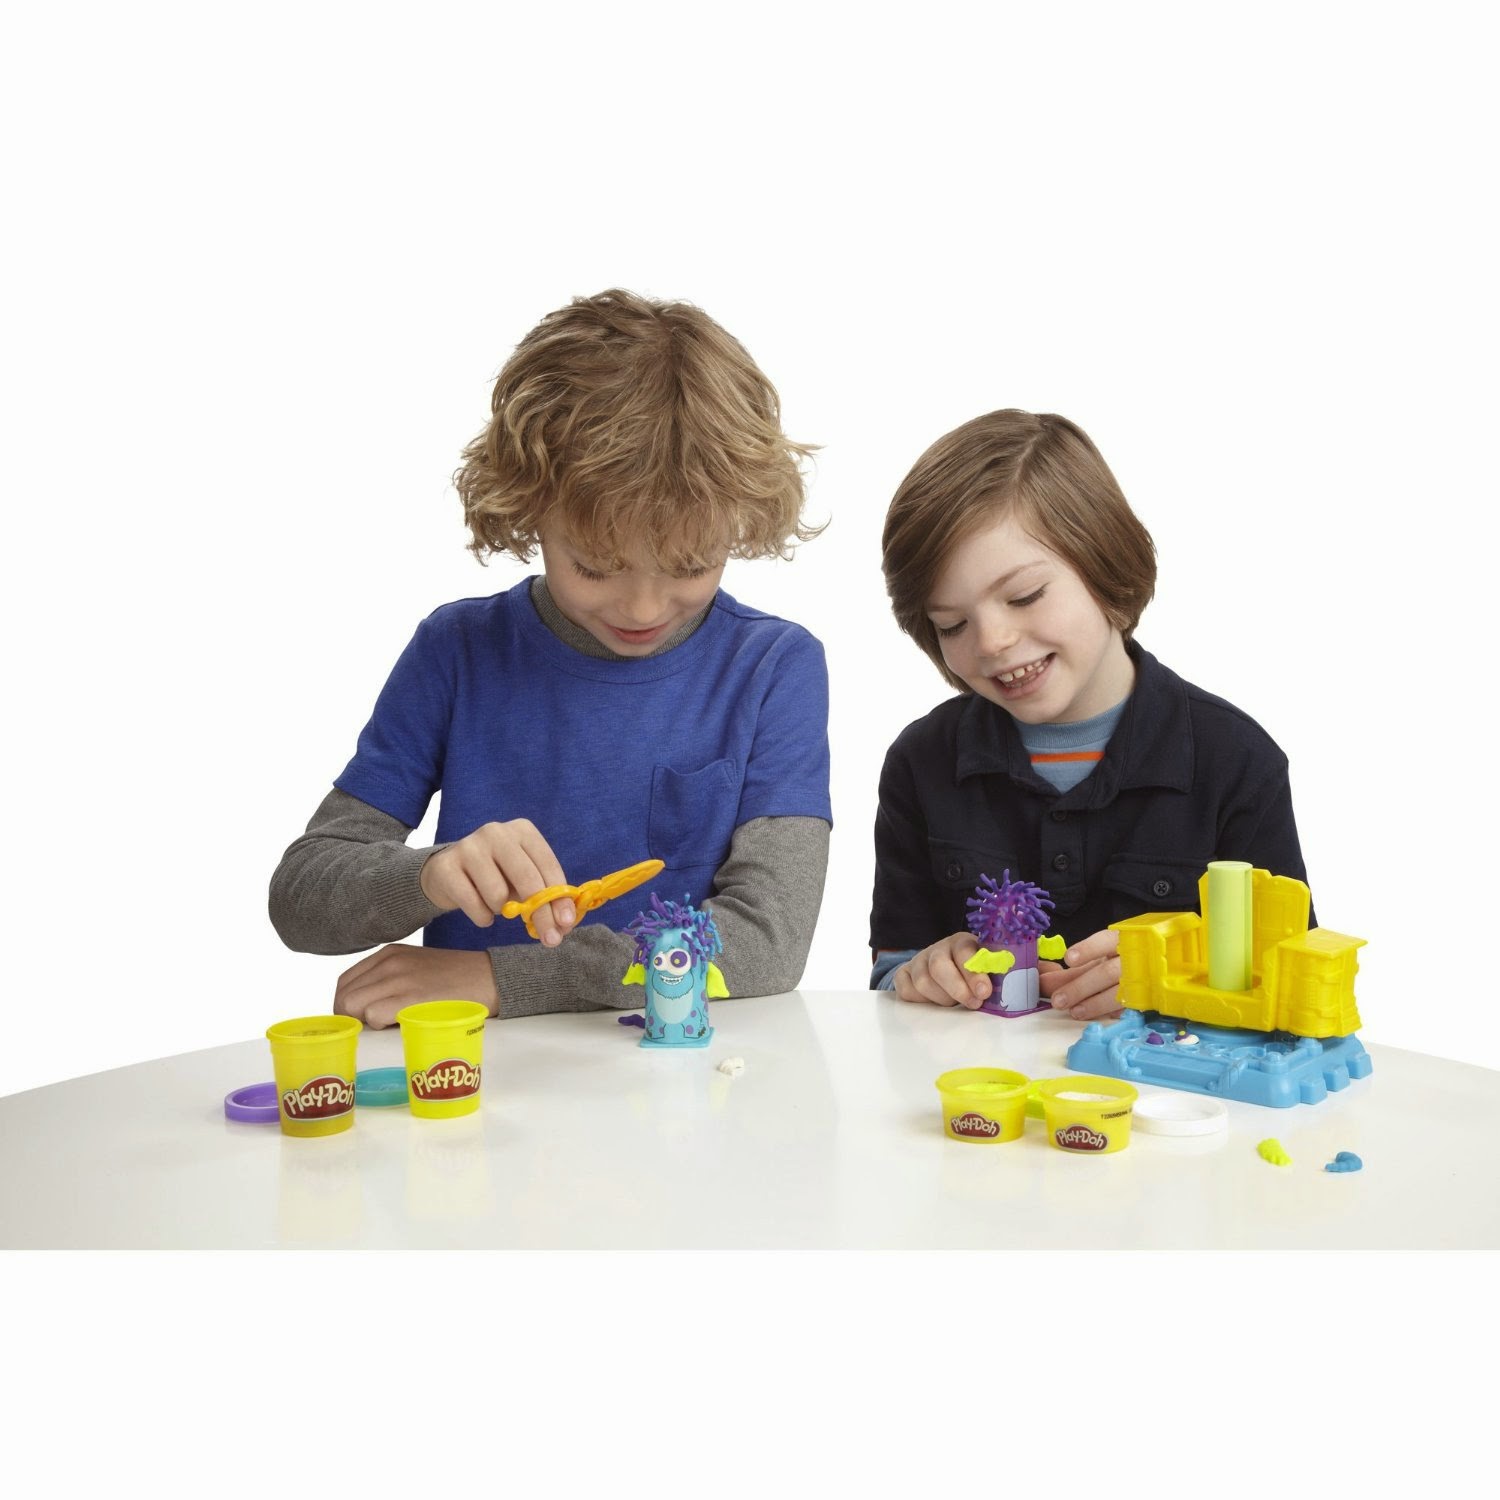 Play-Doh Scare Chair Playset